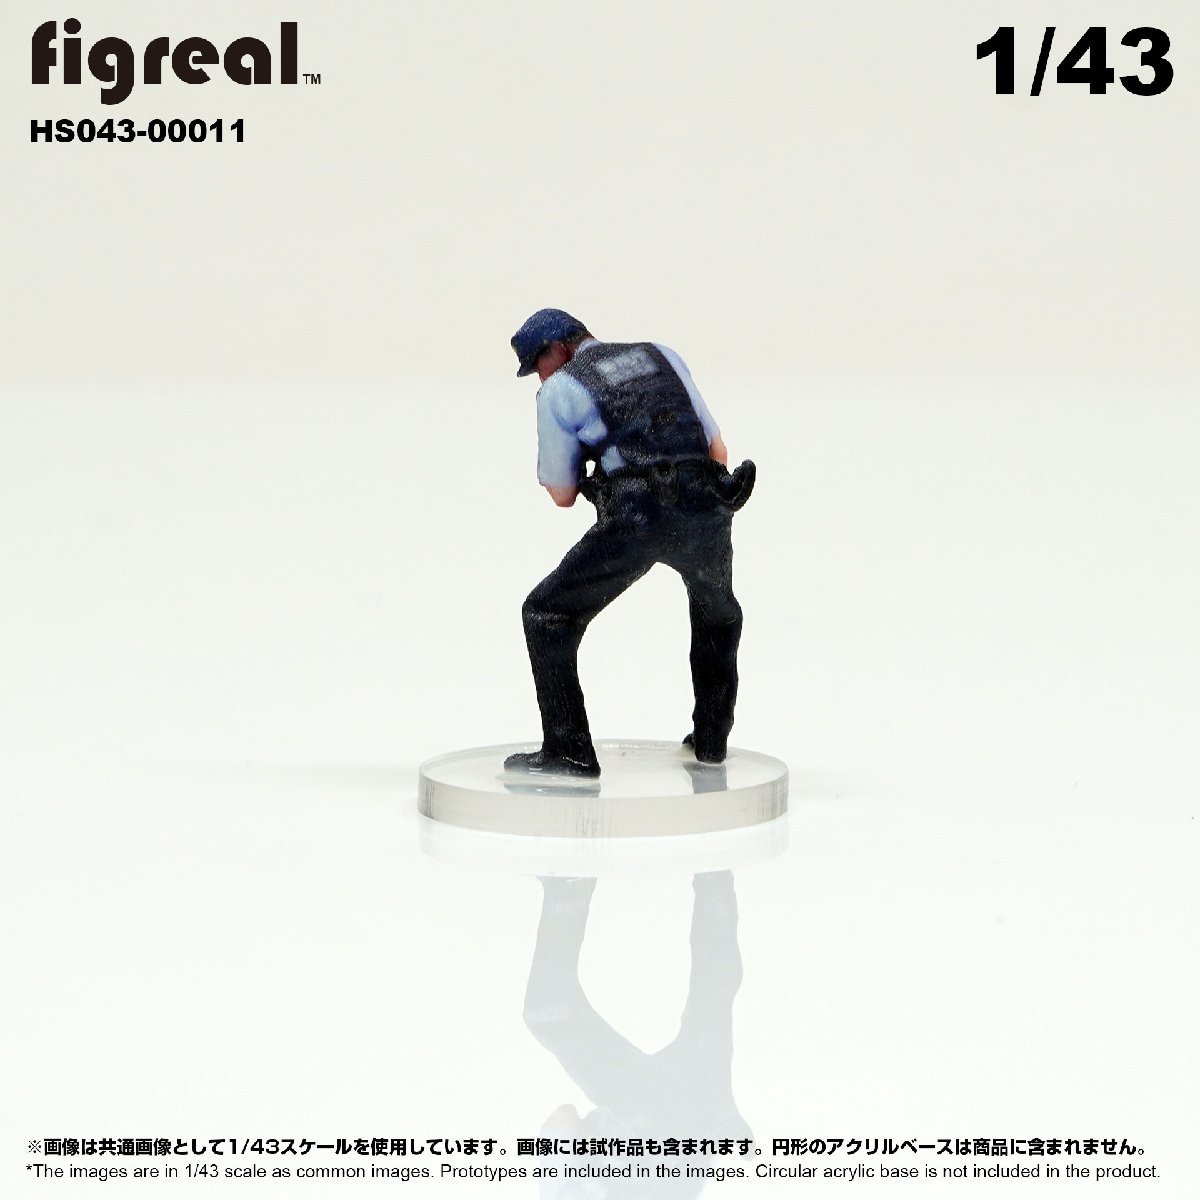 HS043-00011 figreal 日本警察官 1/43 高精細フィギュア_画像4